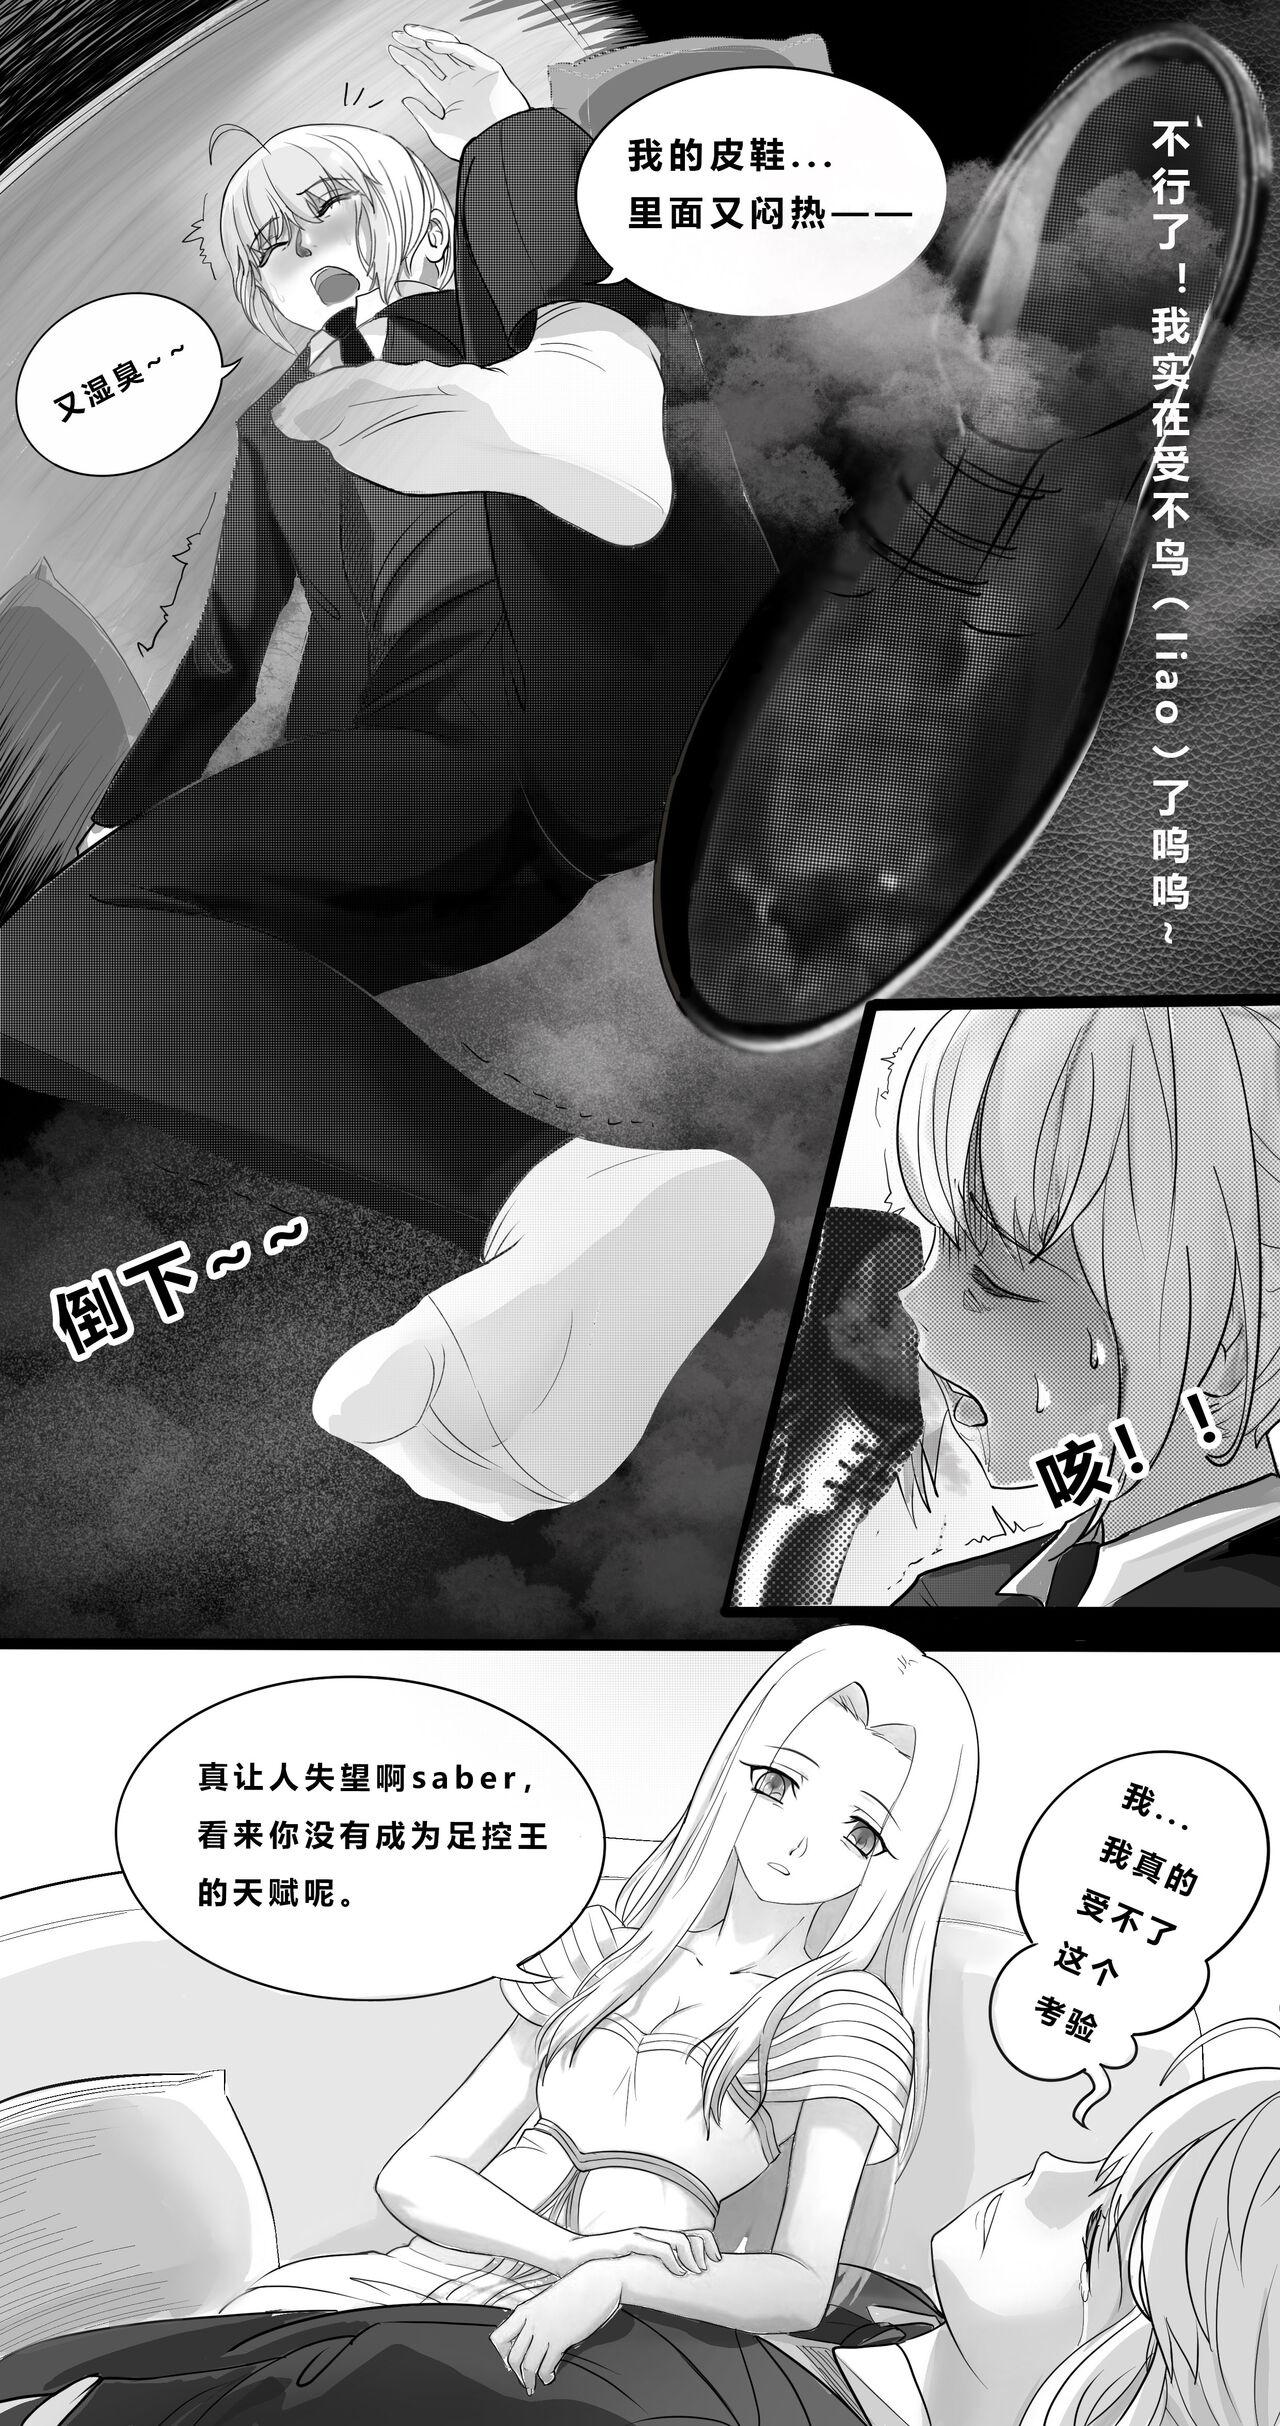 Whipping FATE REQUEST CHINESE VERSION - Fate stay night Big Black Dick - Page 2